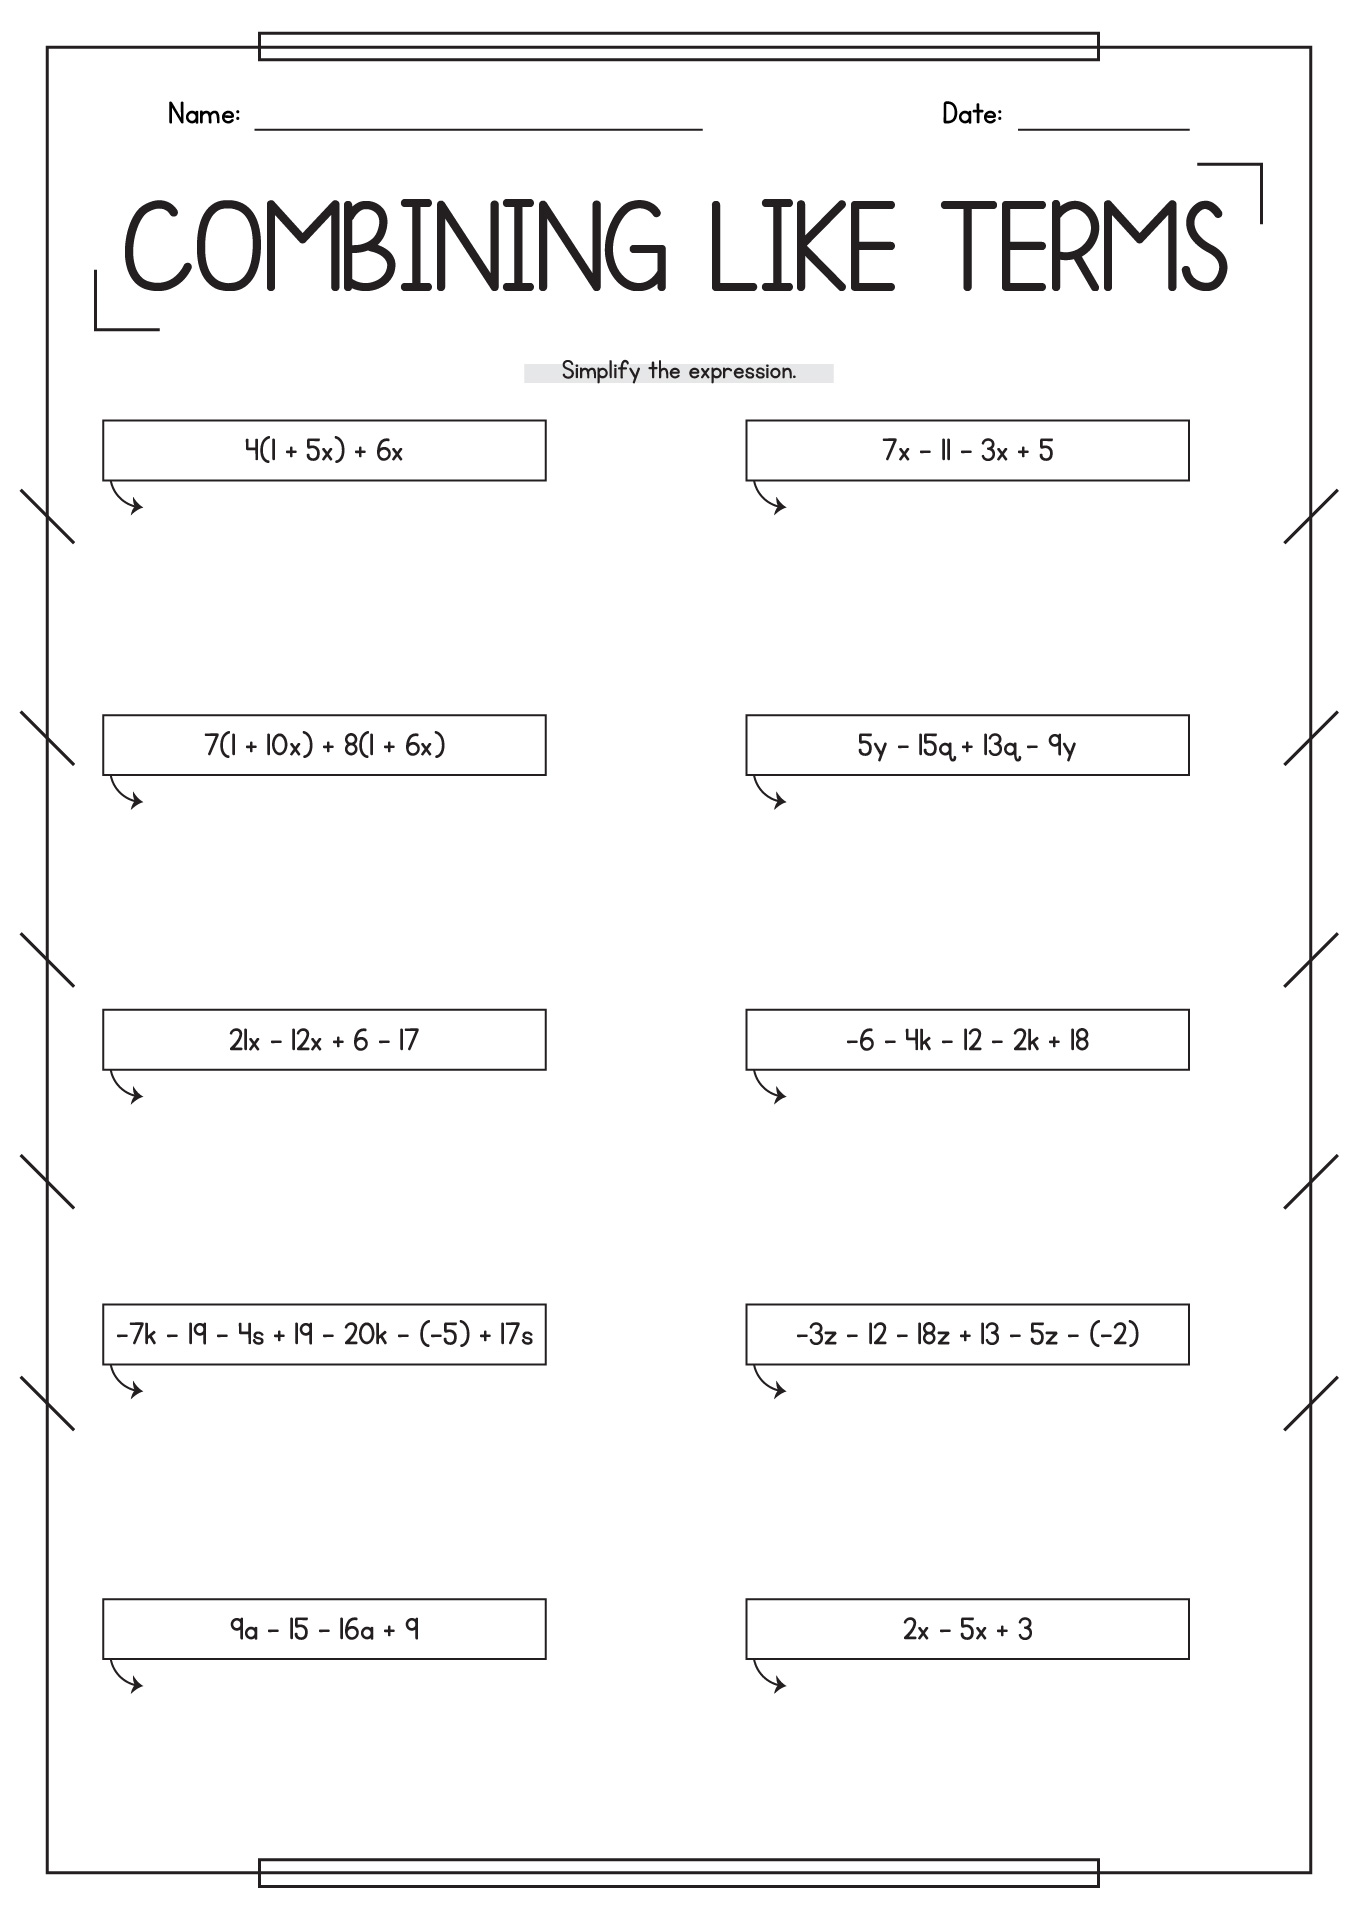 13-best-images-of-combining-like-terms-worksheet-answer-key-algebra-1-combining-like-terms